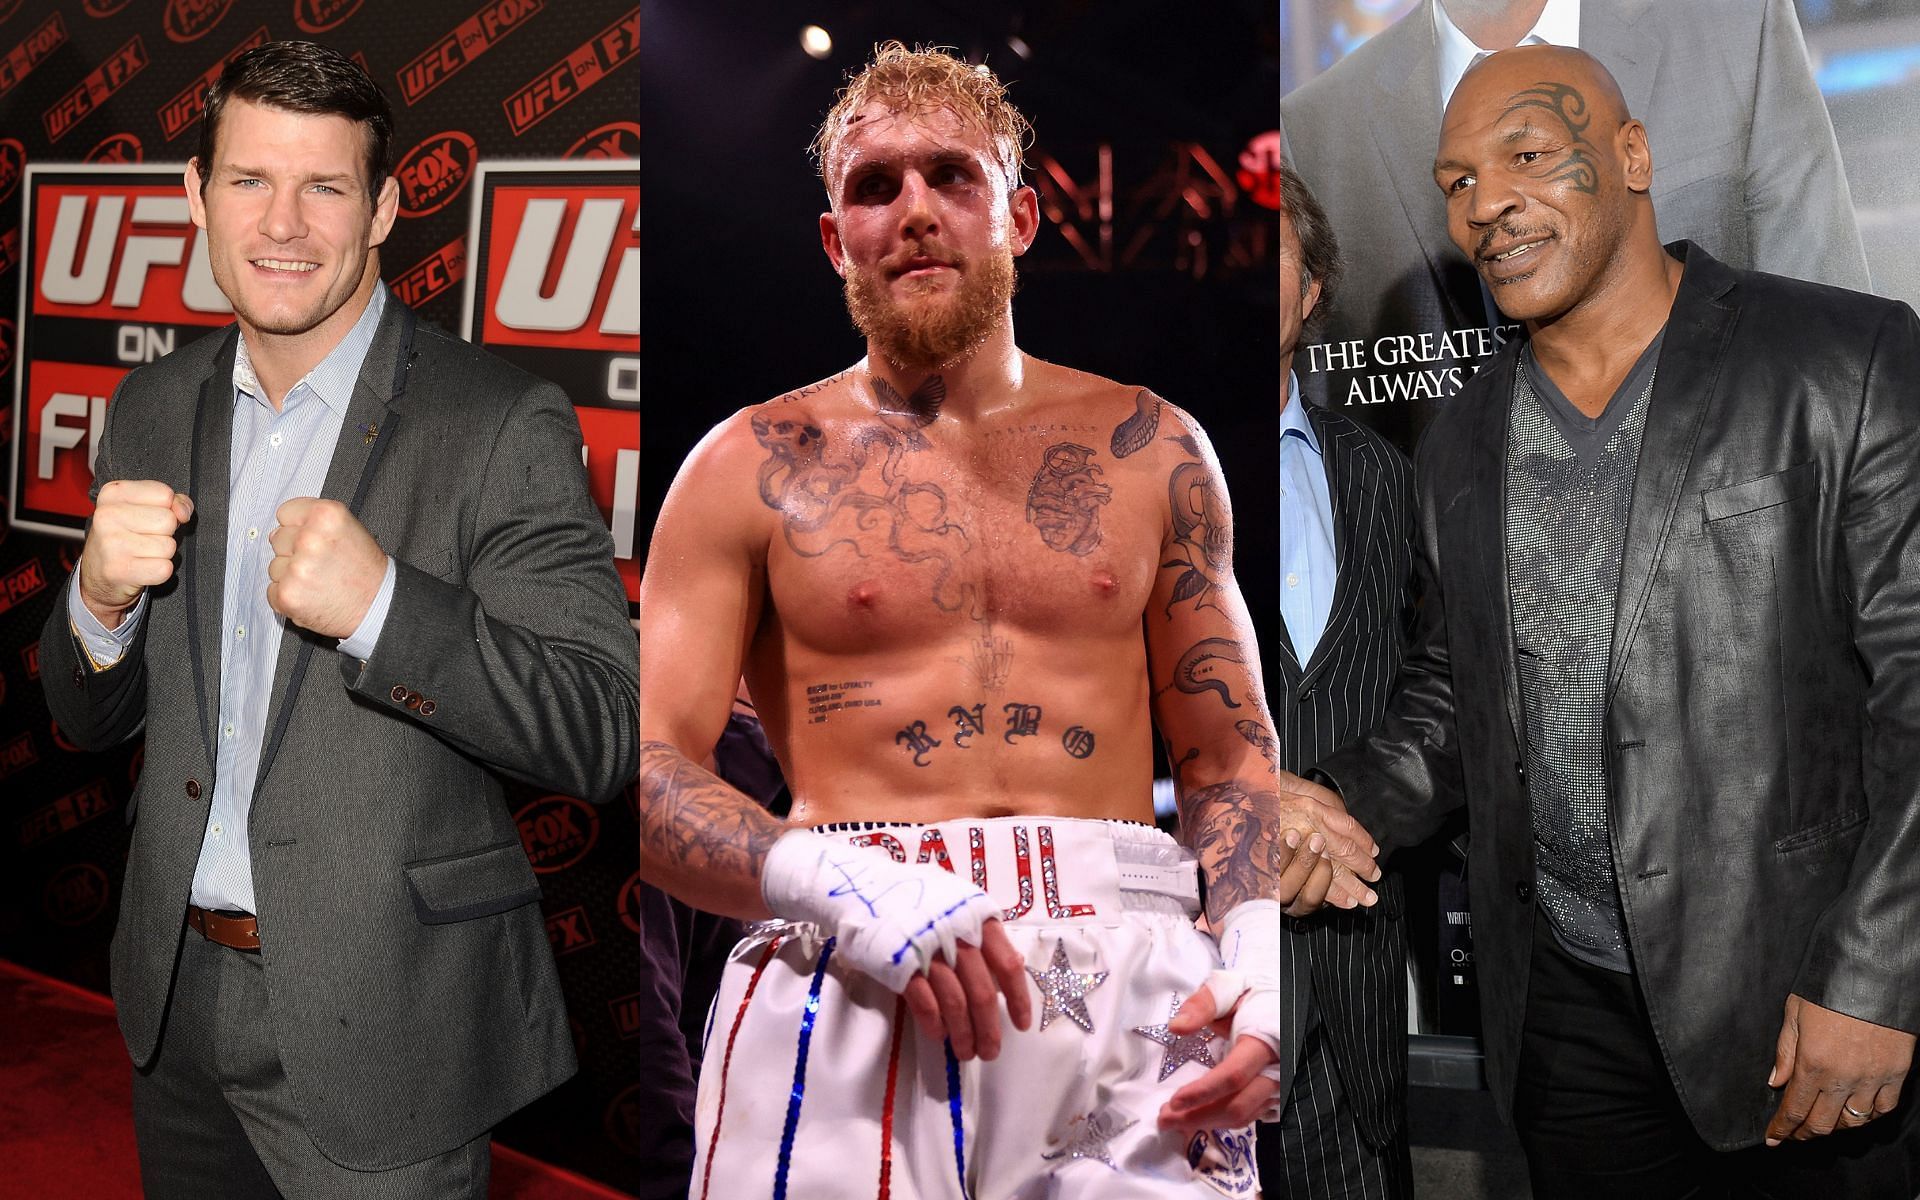 Combat sports superstars Michael Bisping (left), Jake Paul (center), and Mike Tyson (right)